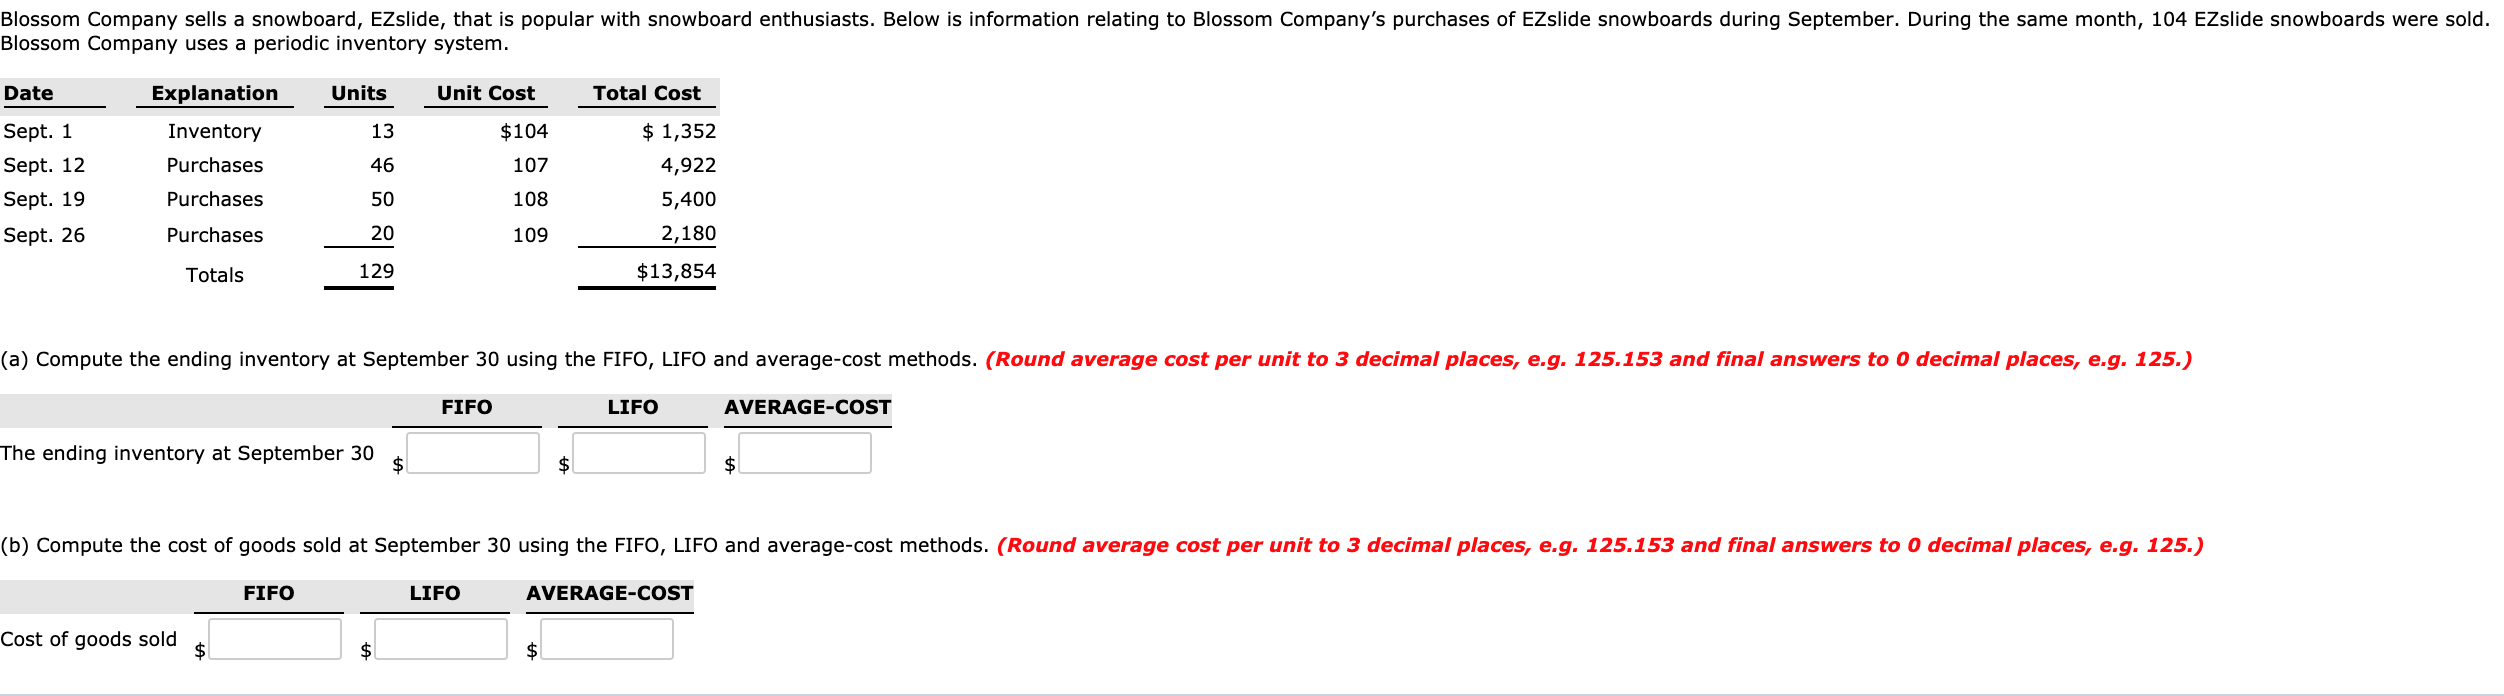 Blossom Company sells a snowboard, EZslide, that is popular with snowboard enthusiasts. Below is information relating to Blossom Company's purchases of EZslide snowboards during September. During the same month, 104 EZslide snowboards were sold.
Blossom Company uses a periodic inventory system.
Date
Explanation
Units
Unit Cost
Total Cost
Sept. 1
Sept. 12
Sept. 19
13
$104
$ 1,352
Inventory
Purchases
46
107
4,922
Purchases
50
108
5,400
Sept. 26
Purchases
20
109
2,180
Totals
129
$13,854
(a) Compute the ending inventory at September 30 using the FIFO, LIFO and average-cost methods. (Round average cost per unit to 3 decimal places, e.g. 125.153 and final answers to 0 decimal places, e.g. 125.)
FIFO
LIFO
AVERAGE-COST
The ending inventory at Sep
30
2$
$4
2$
(b) Compute the cost of goods sold at September 30 using the FIFO, LIFO and average-cost methods. (Round average cost per unit to 3 decimal places, e.g. 125.153 and final answers to 0 decimal places, e.g. 125.)
FIFO
LIFO
AVERAGE-COST
Cost of goods sold
2$
$1
$4
